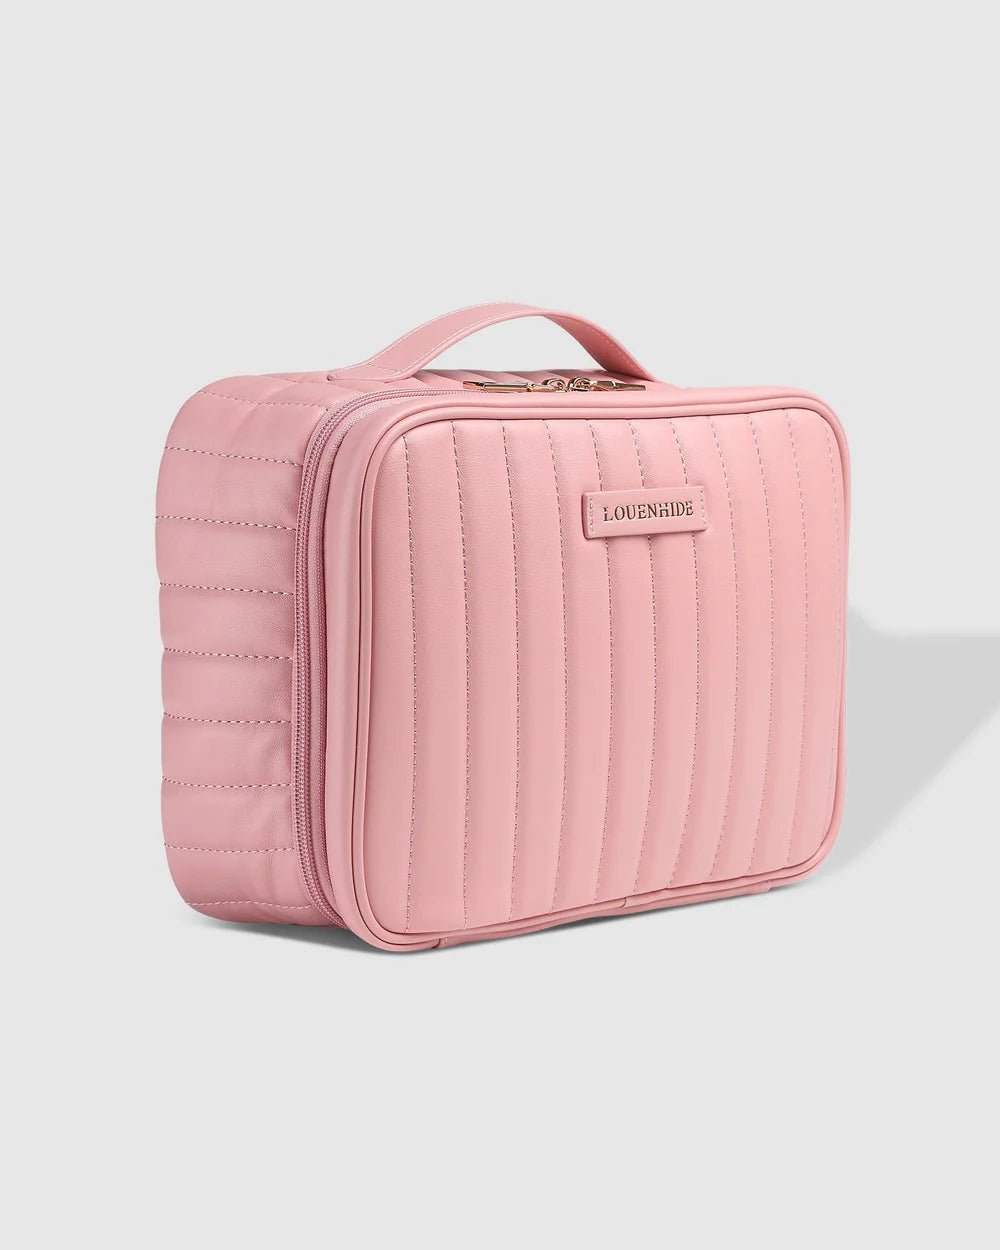 LOUENHIDE_MAGGIE COSMETIC CASE PALE PINK _ MAGGIE COSMETIC CASE PALE PINK _ Ebony Boutique NZ